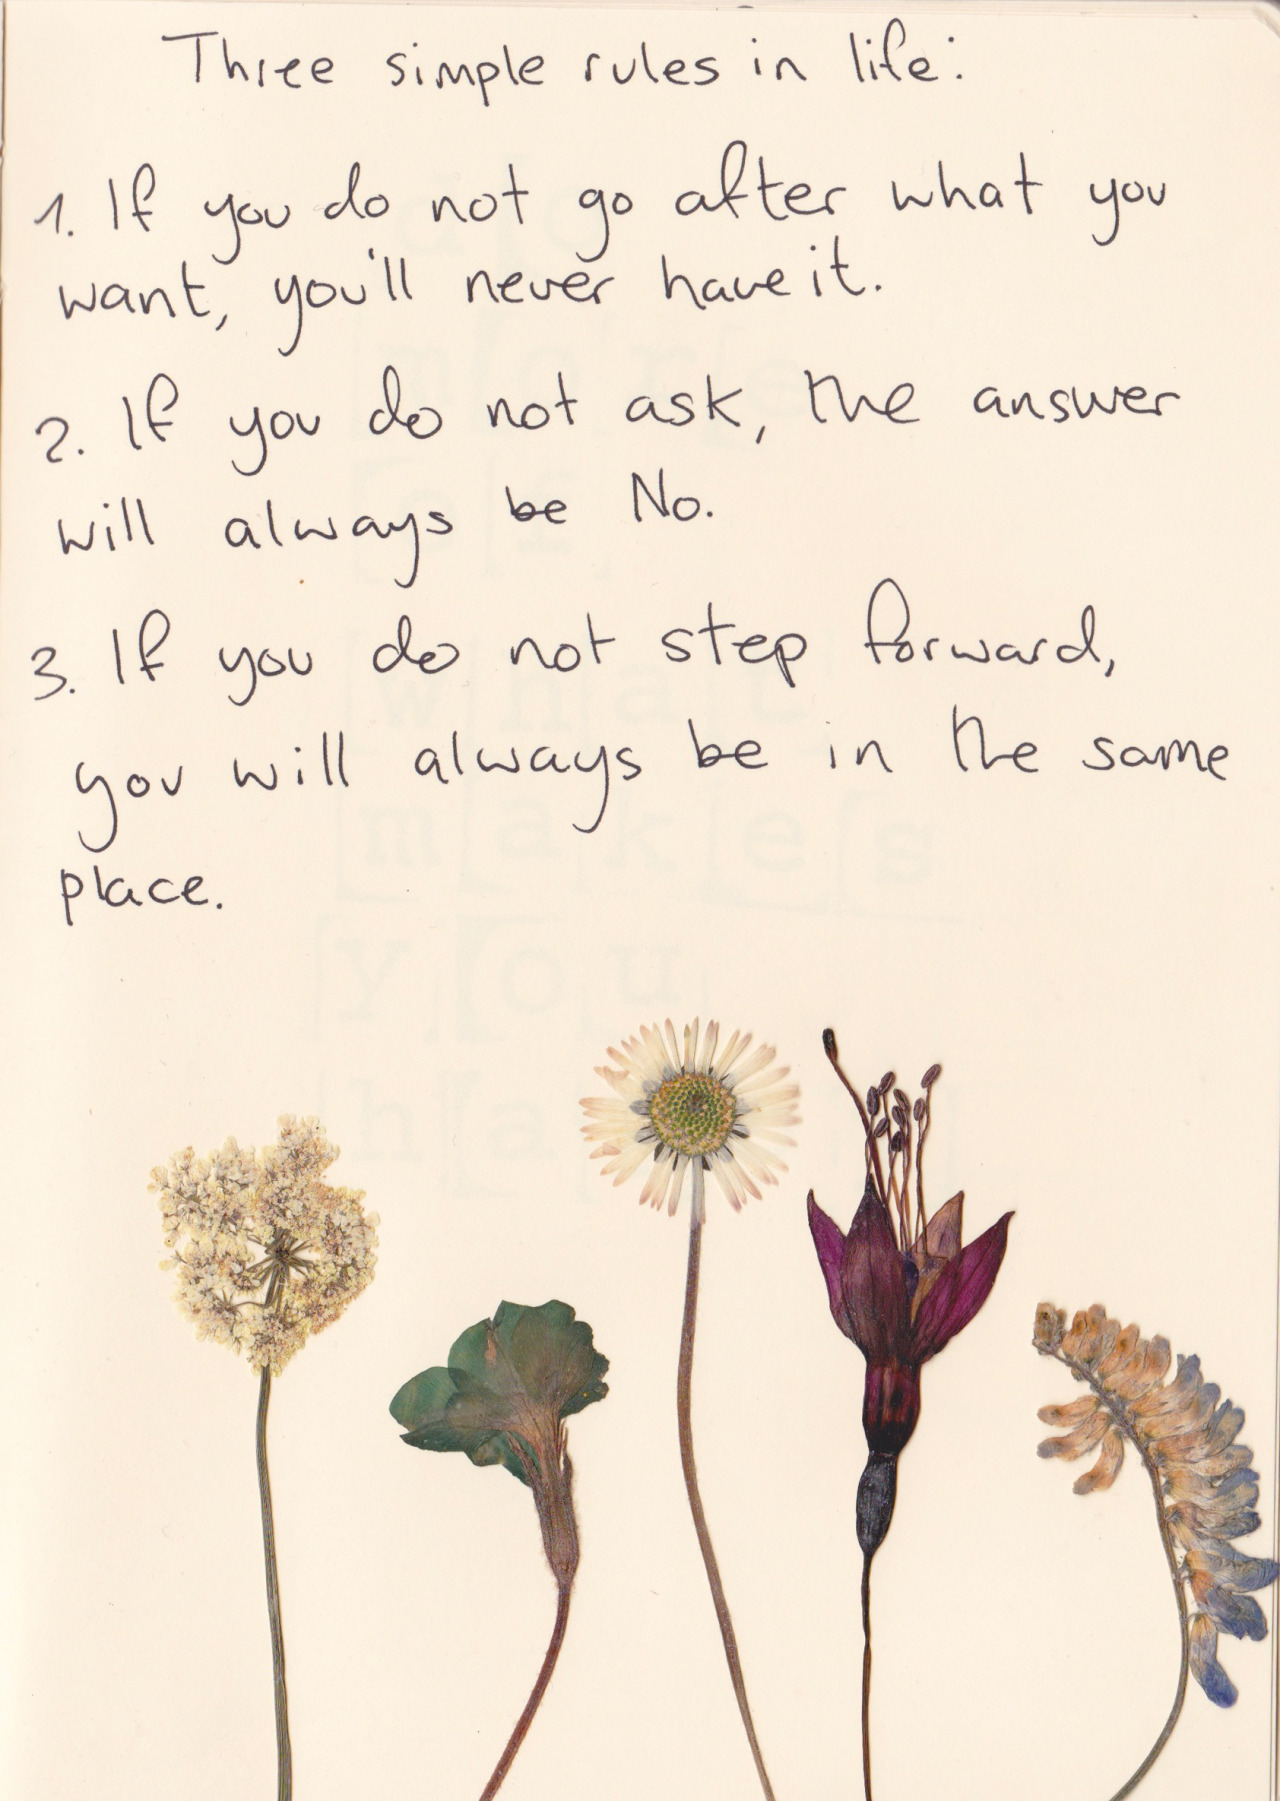 Three simple rules in life - From my rotting body, flowers ...
